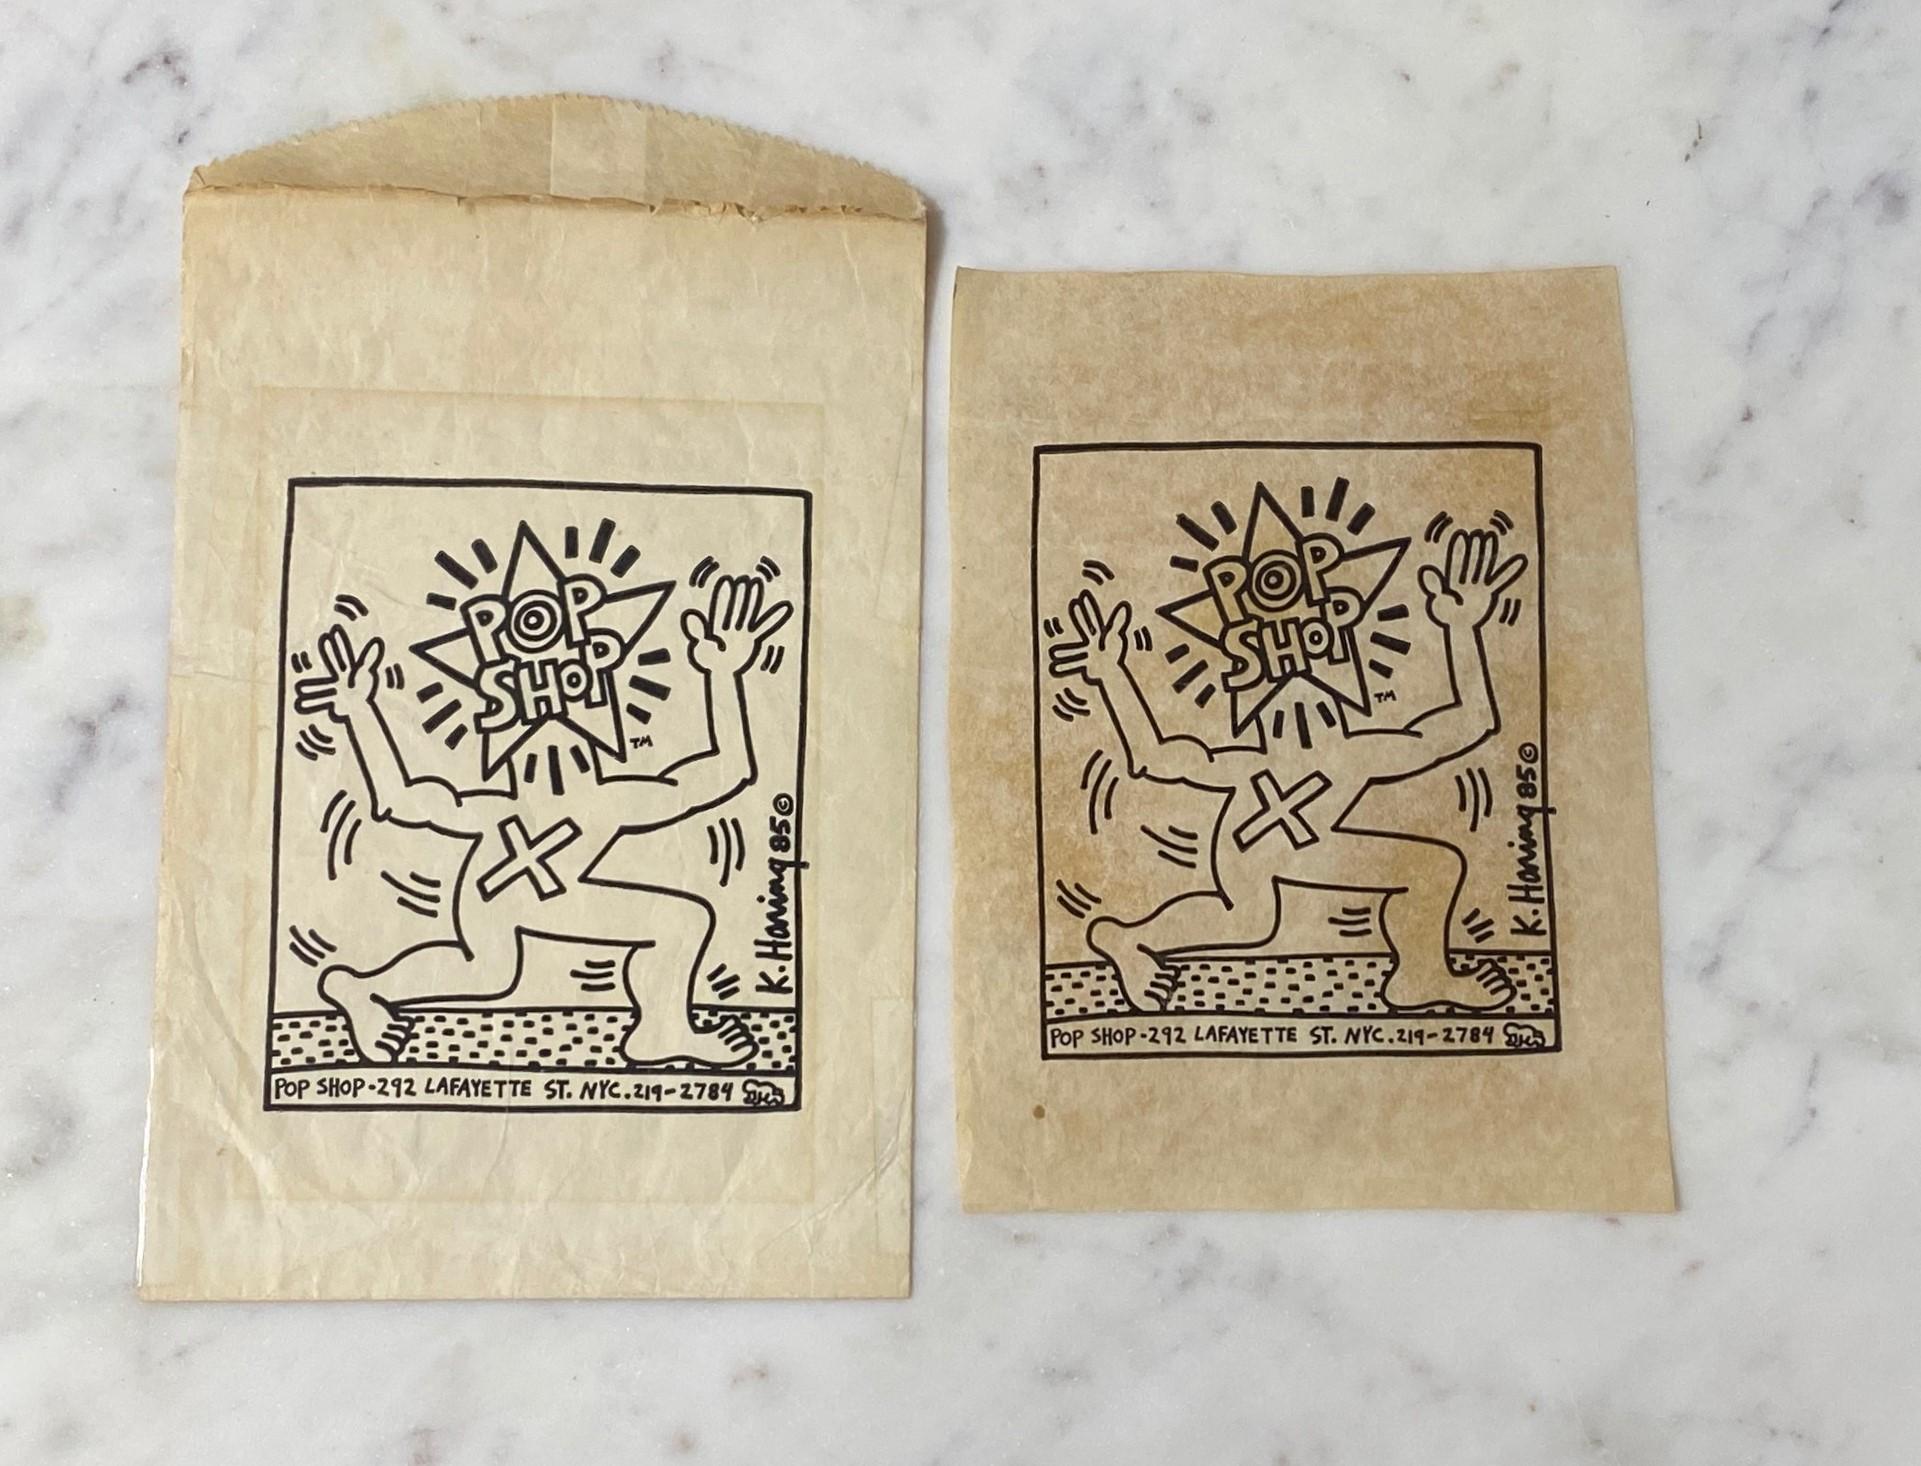 A very cool vintage 1980s NYC Pop Shop store bag which was illustrated by Keith Haring.  Few of these original shopping bags exist today.  

The now collectible bags were done as an offset lithograph on white paper and would look great once